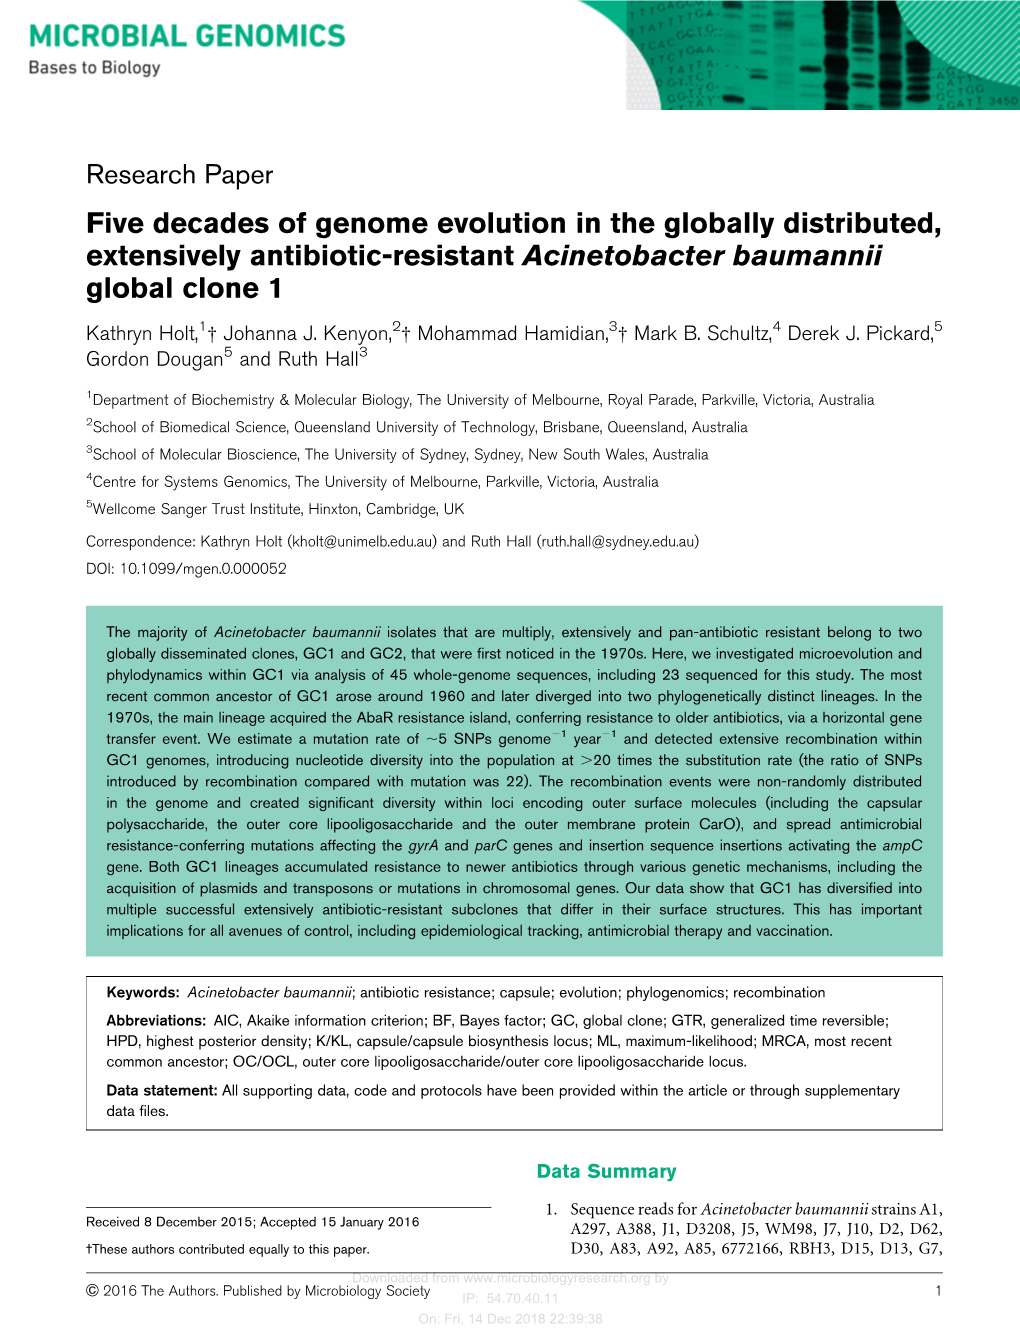 Five Decades of Genome Evolution in the Globally Distributed, Extensively Antibiotic-Resistant Acinetobacter Baumannii Global Clone 1